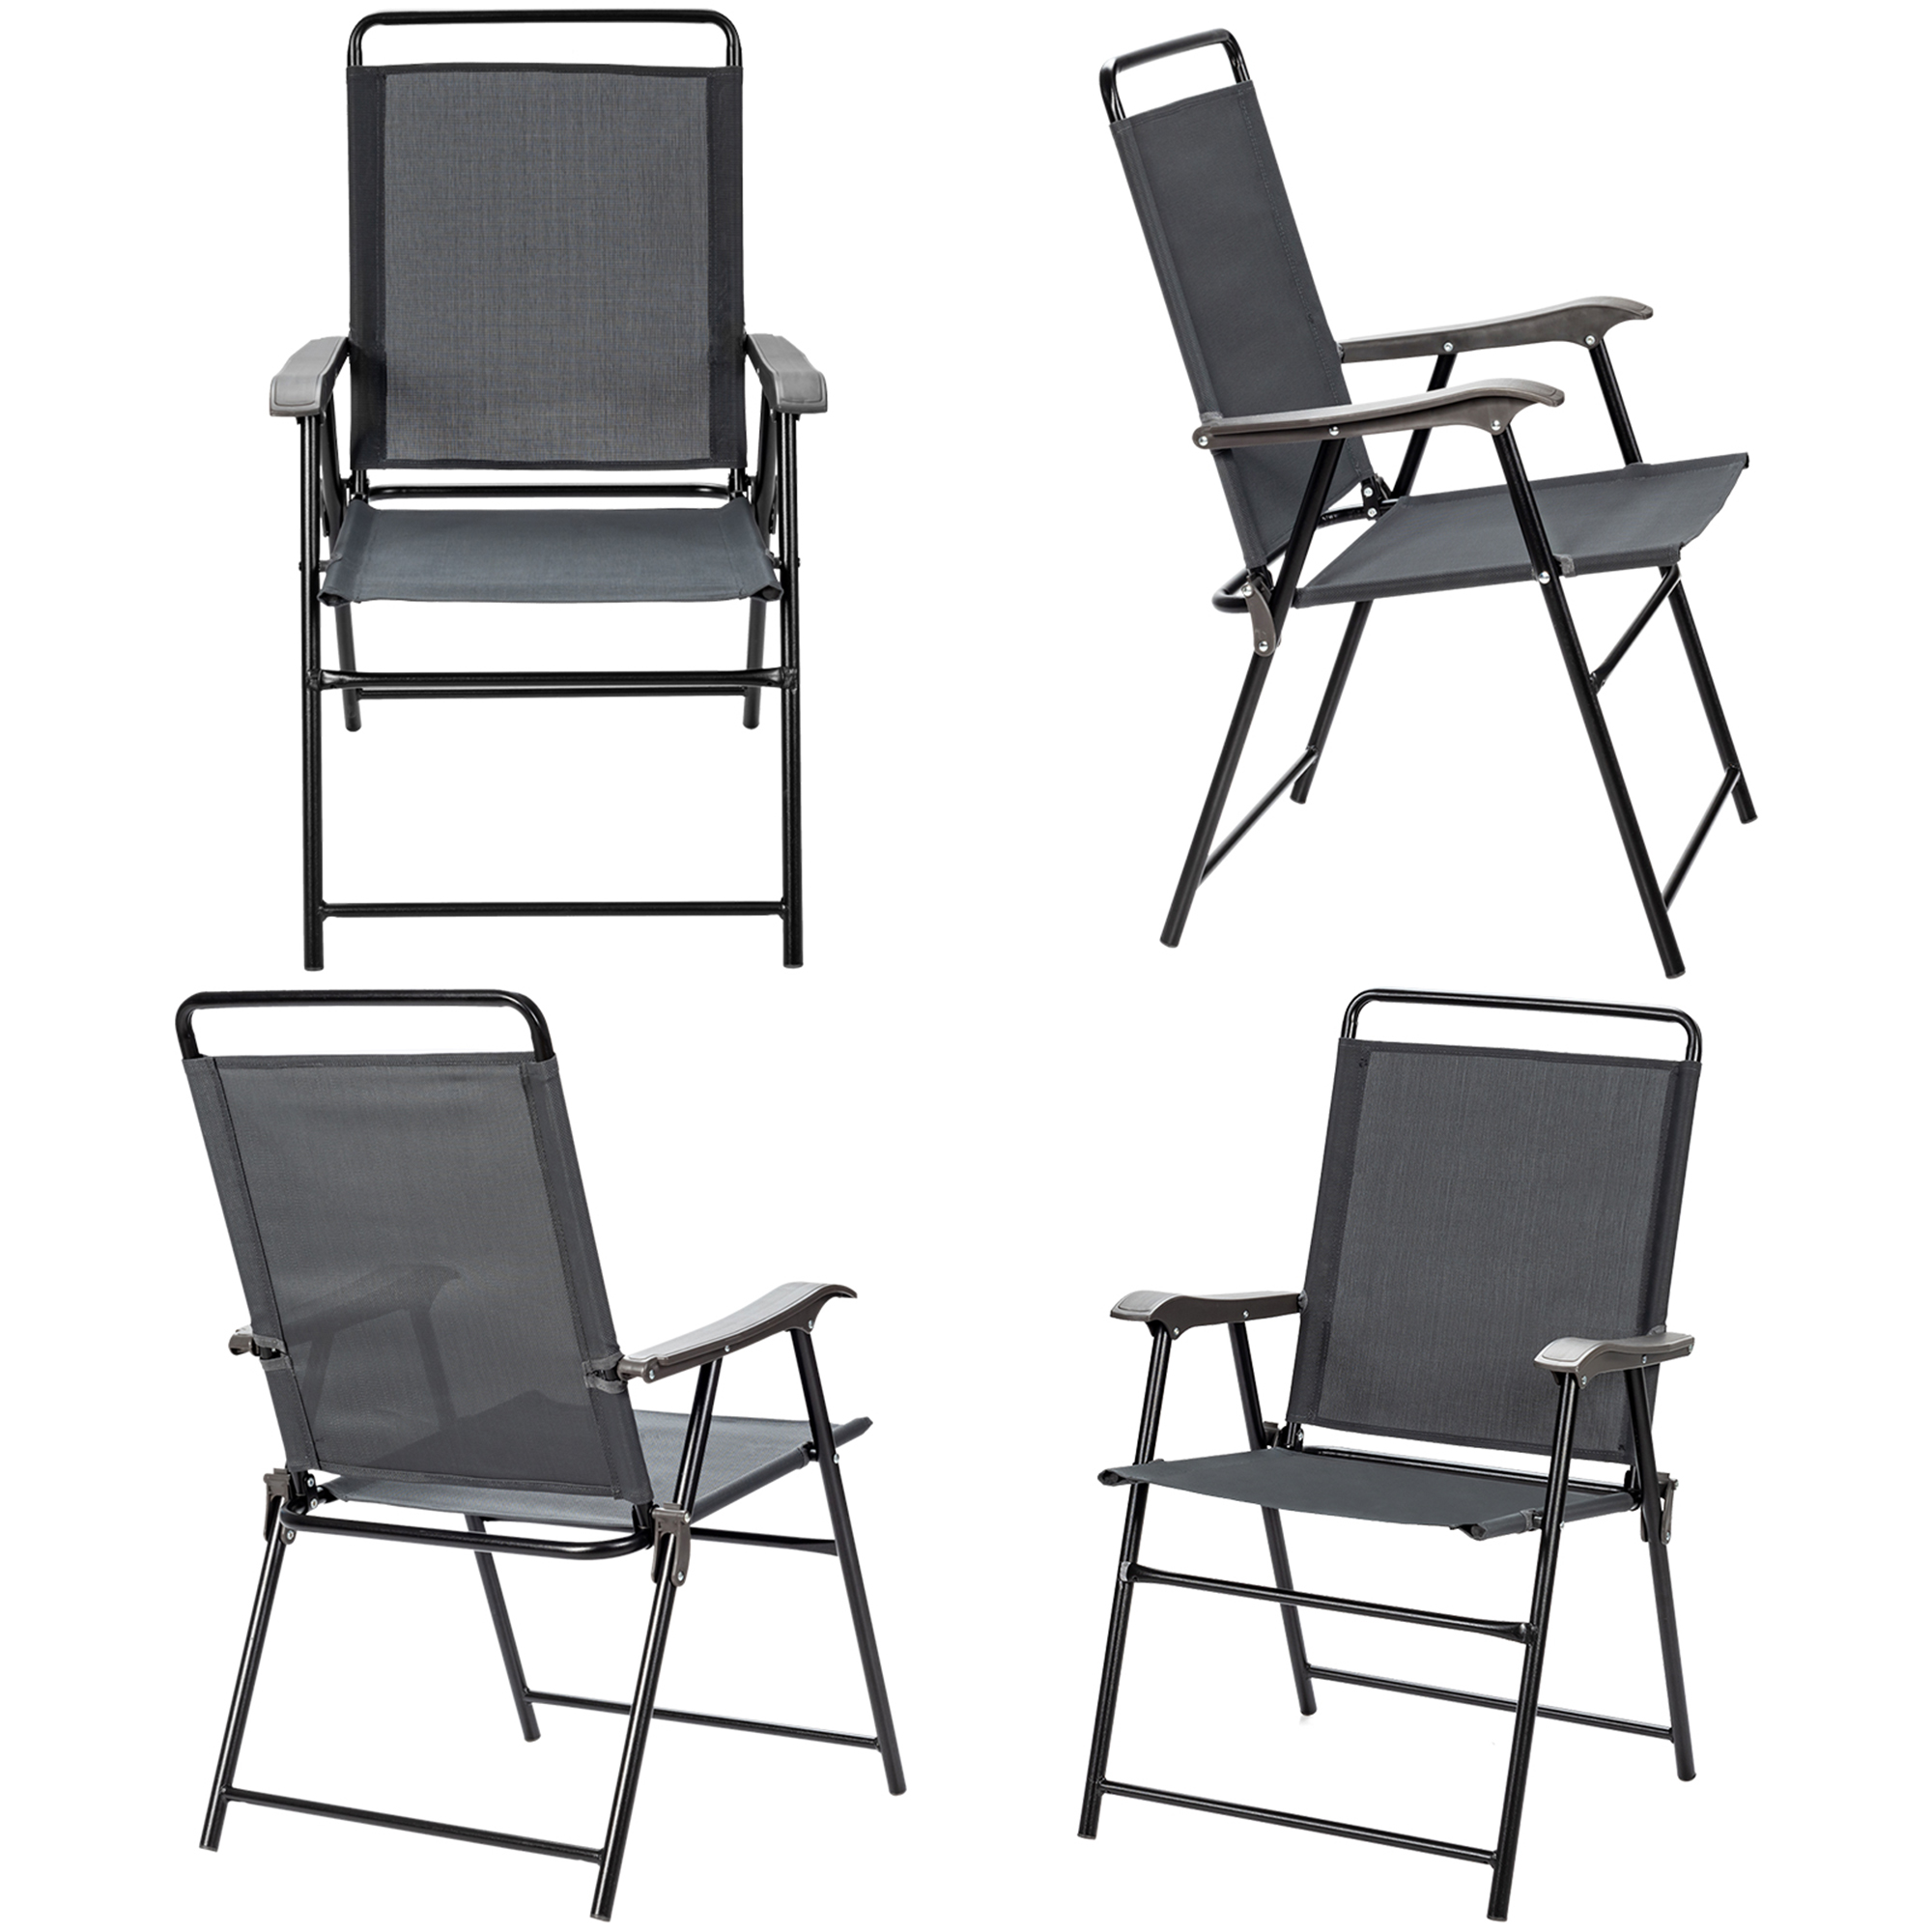 Gymax Set of 4 Folding Patio Chair Portable Sling Chair Yard Garden Outdoor - image 5 of 10